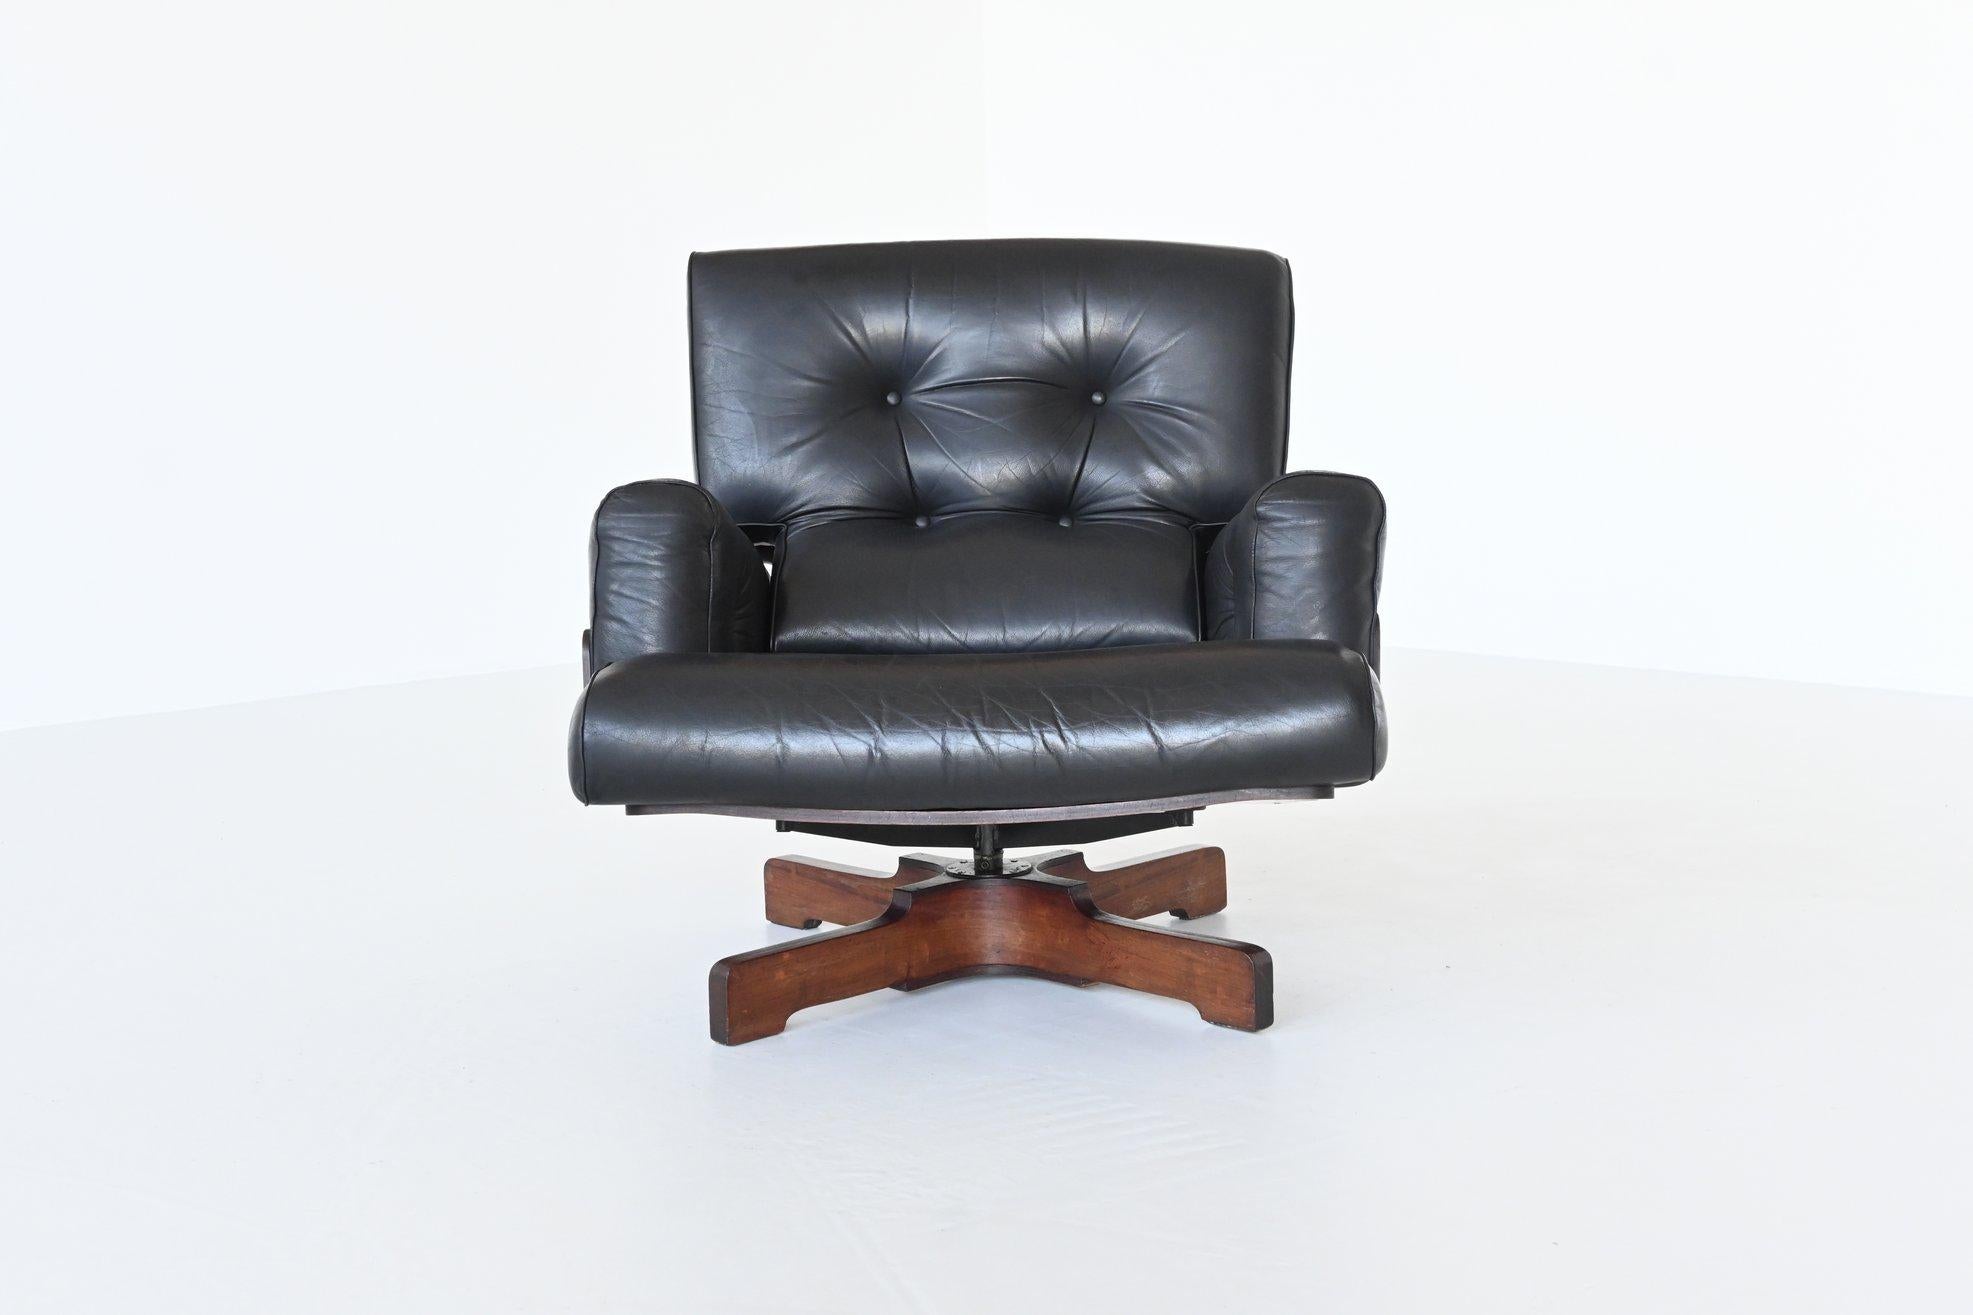 Stunning lounge chair model 401 designed by Menilio Taro for Cinova, Italy, 1964. This fantastic shaped lounge chair set is made of rosewood plywood and has high quality black leather tufted cushions. The base of the chair is made of solid rosewood